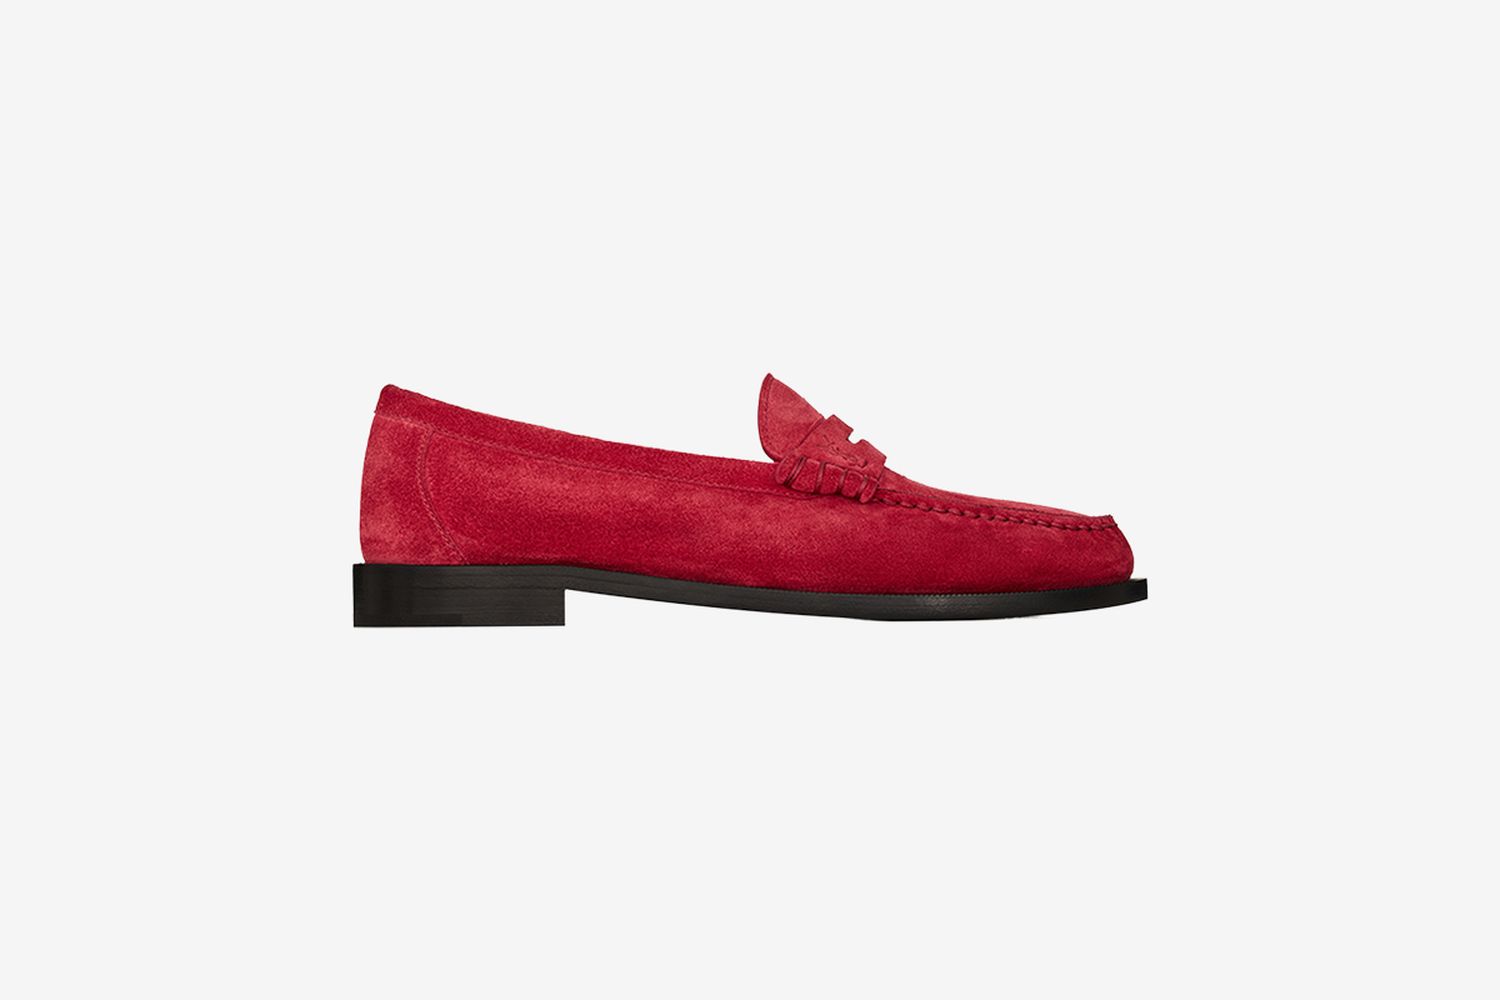 Le Loafer Monogram Penny Loafers